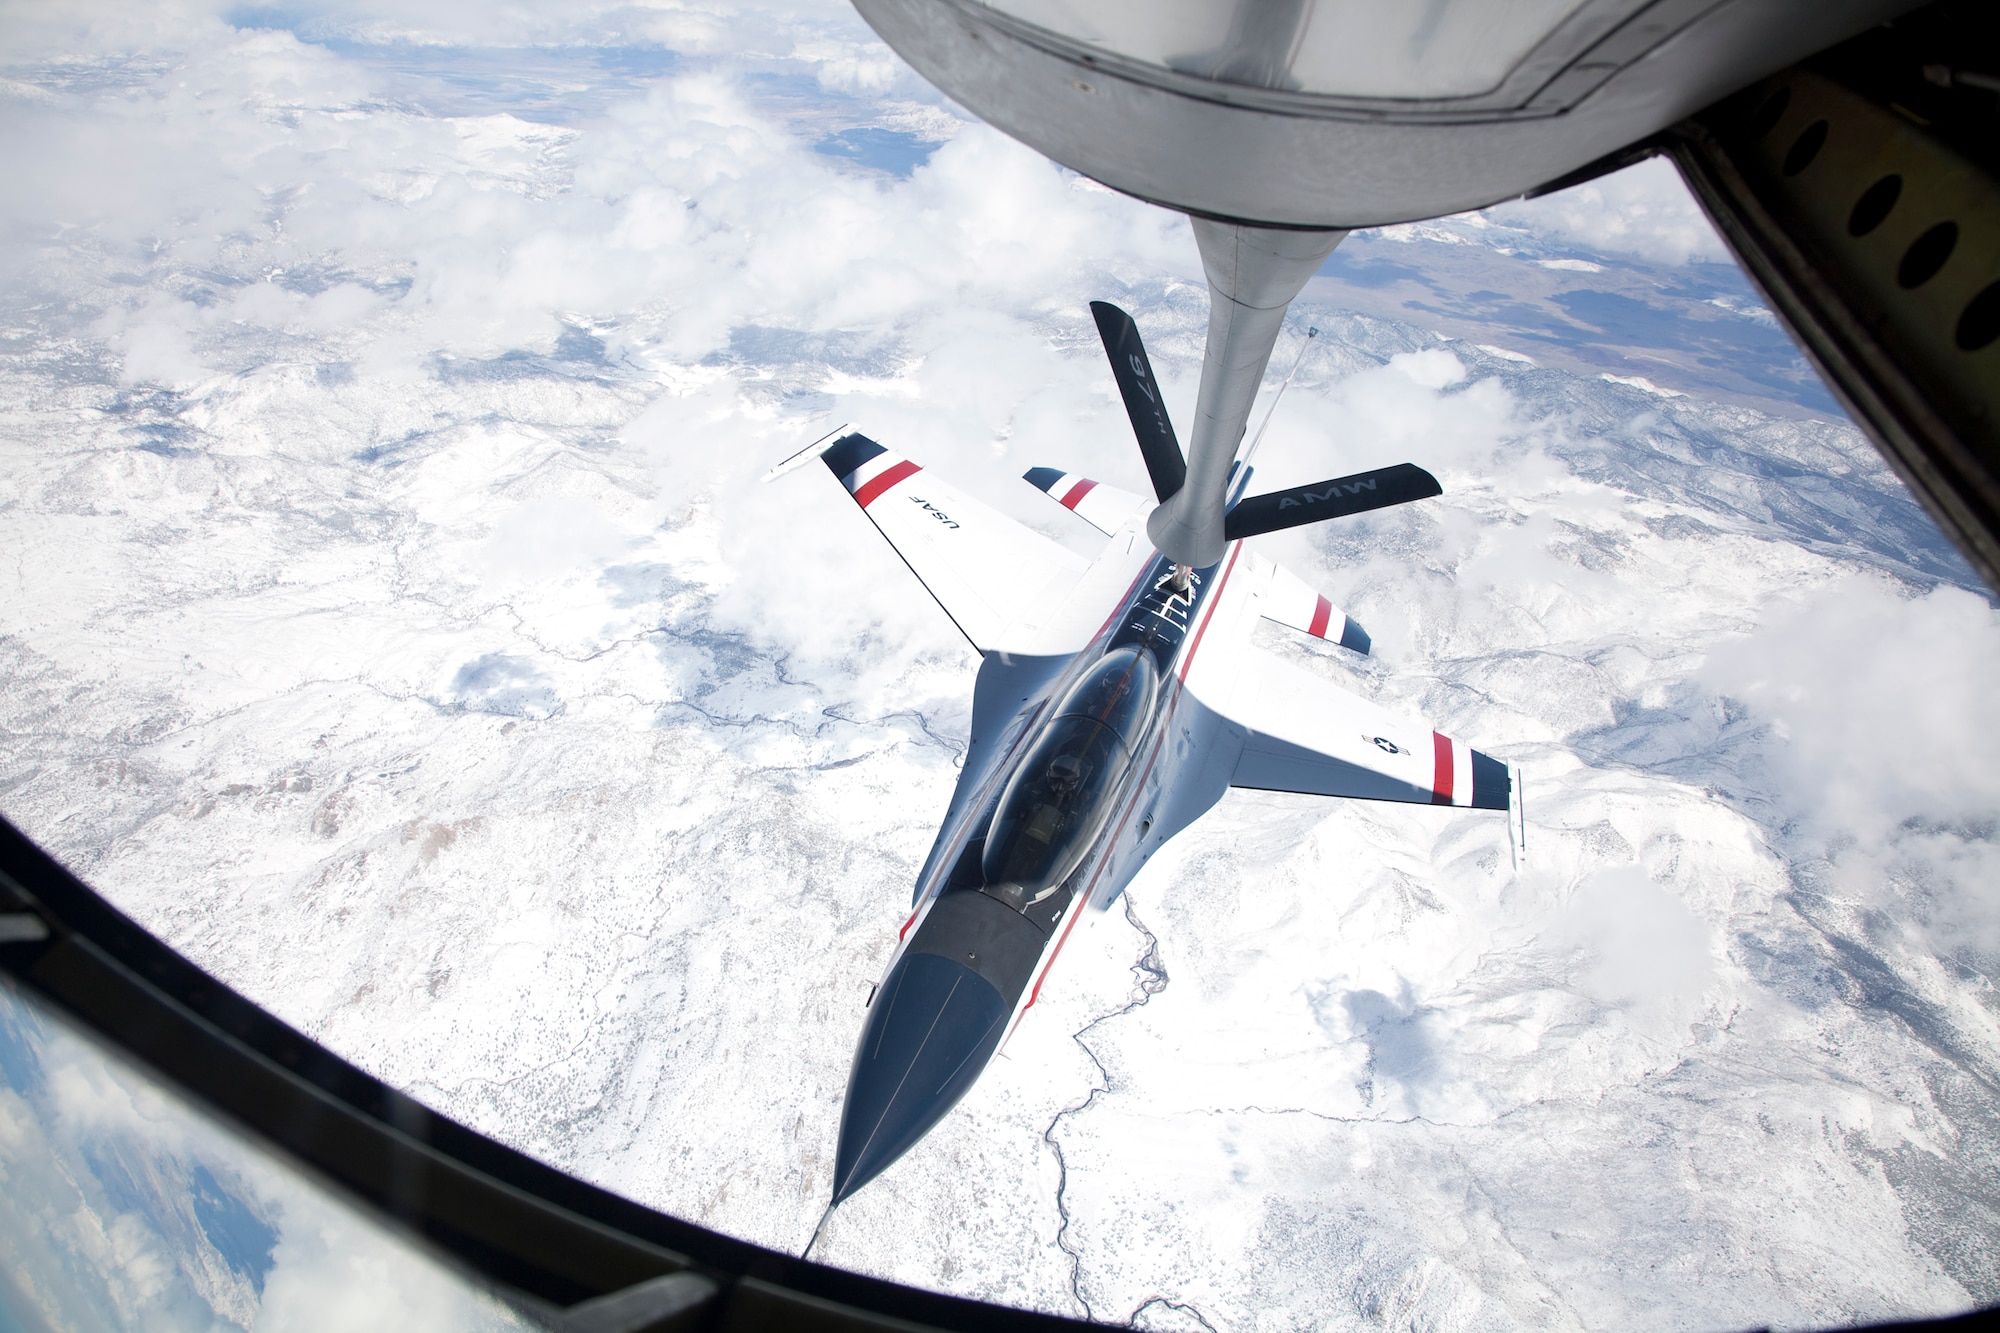 The view from a KC-135 tanker from Altus Air Force Base, Okla., while the United States Air Force Test Pilot School’s VISTA (Variable stability In-flight Simulator Test Aircraft) F-16 connects to the boom during a flight test March 17. The maneuver is part of the Basic Envelope Air Refueling Control Laws, or BEAR CLAW, test project, which is aimed at obtaining preliminary data leading ultimately to have an unmanned aerial vehicle conduct air-to-air refueling. (Air Force photo by Bobbi Zapka)